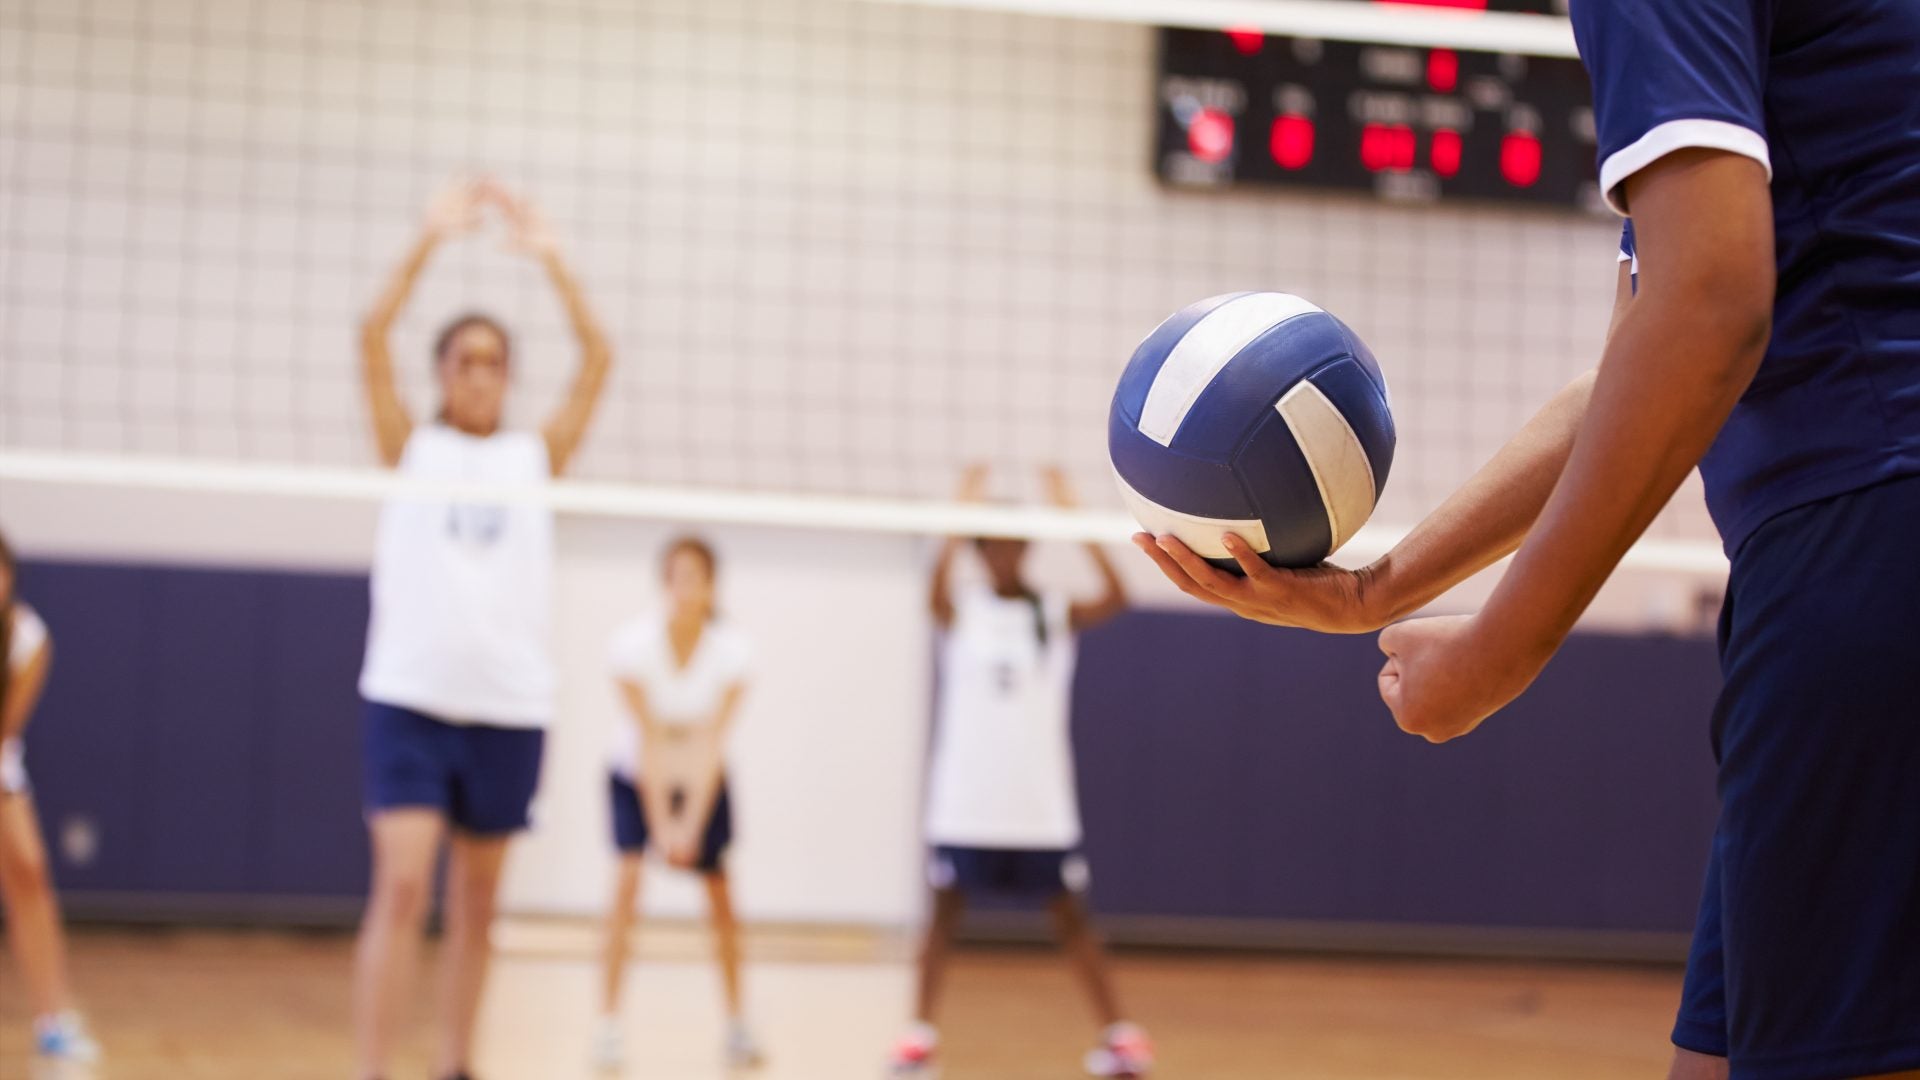 Kansas High Schoolers Subject To Racial Slurs During Volleyball Game